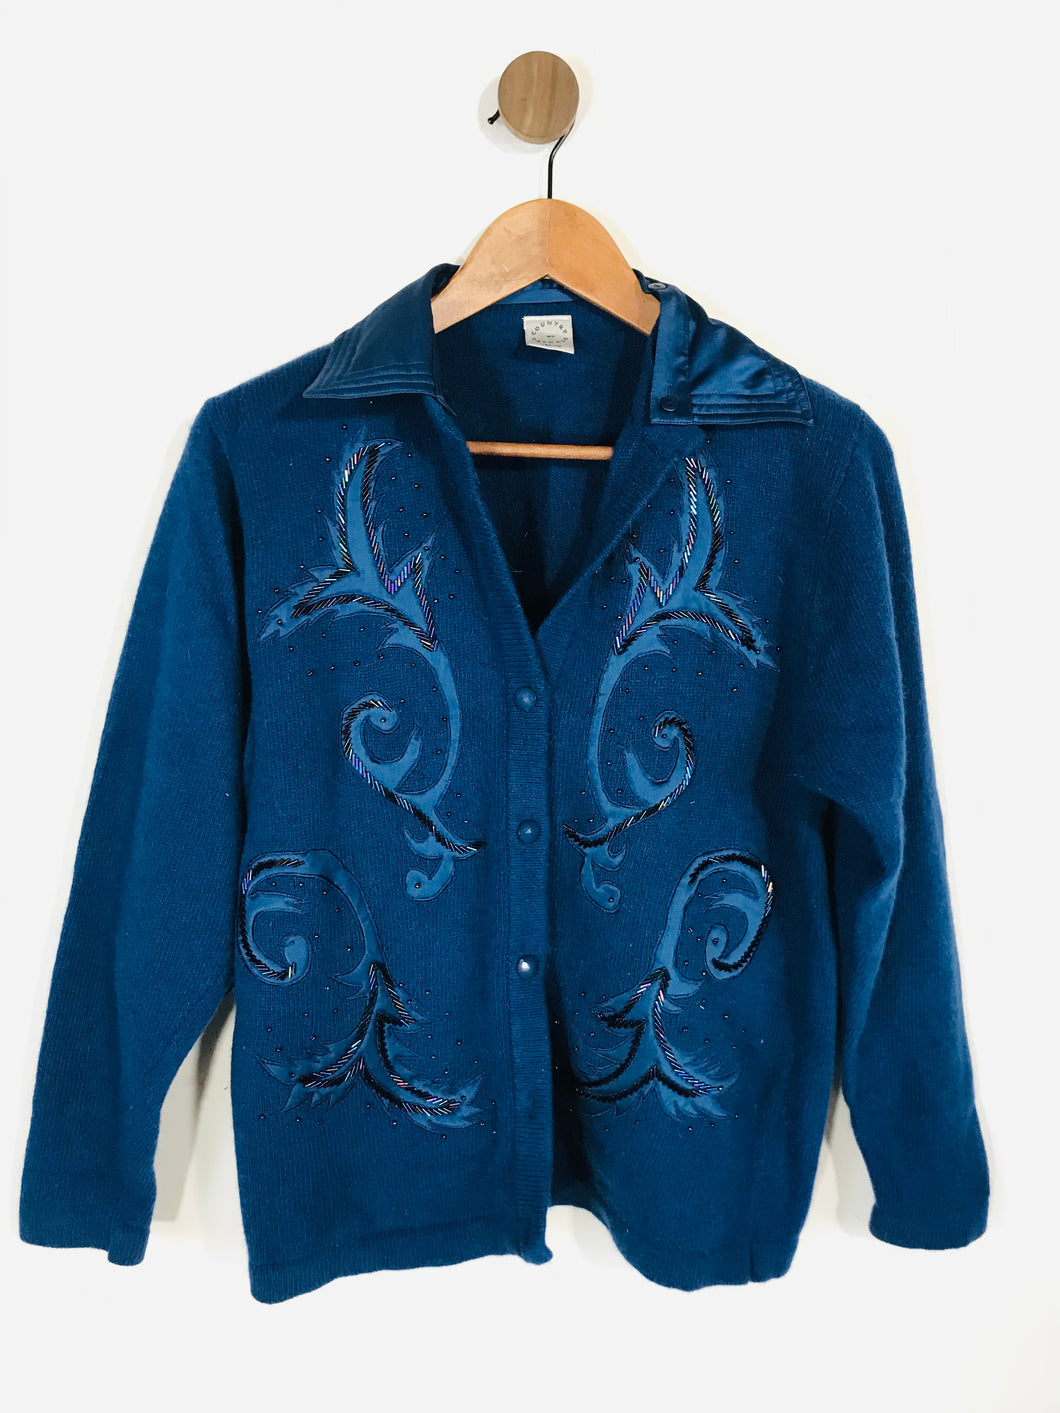 Country Casuals Women's Wool Embroidered Cardigan | M UK10-12 | Blue